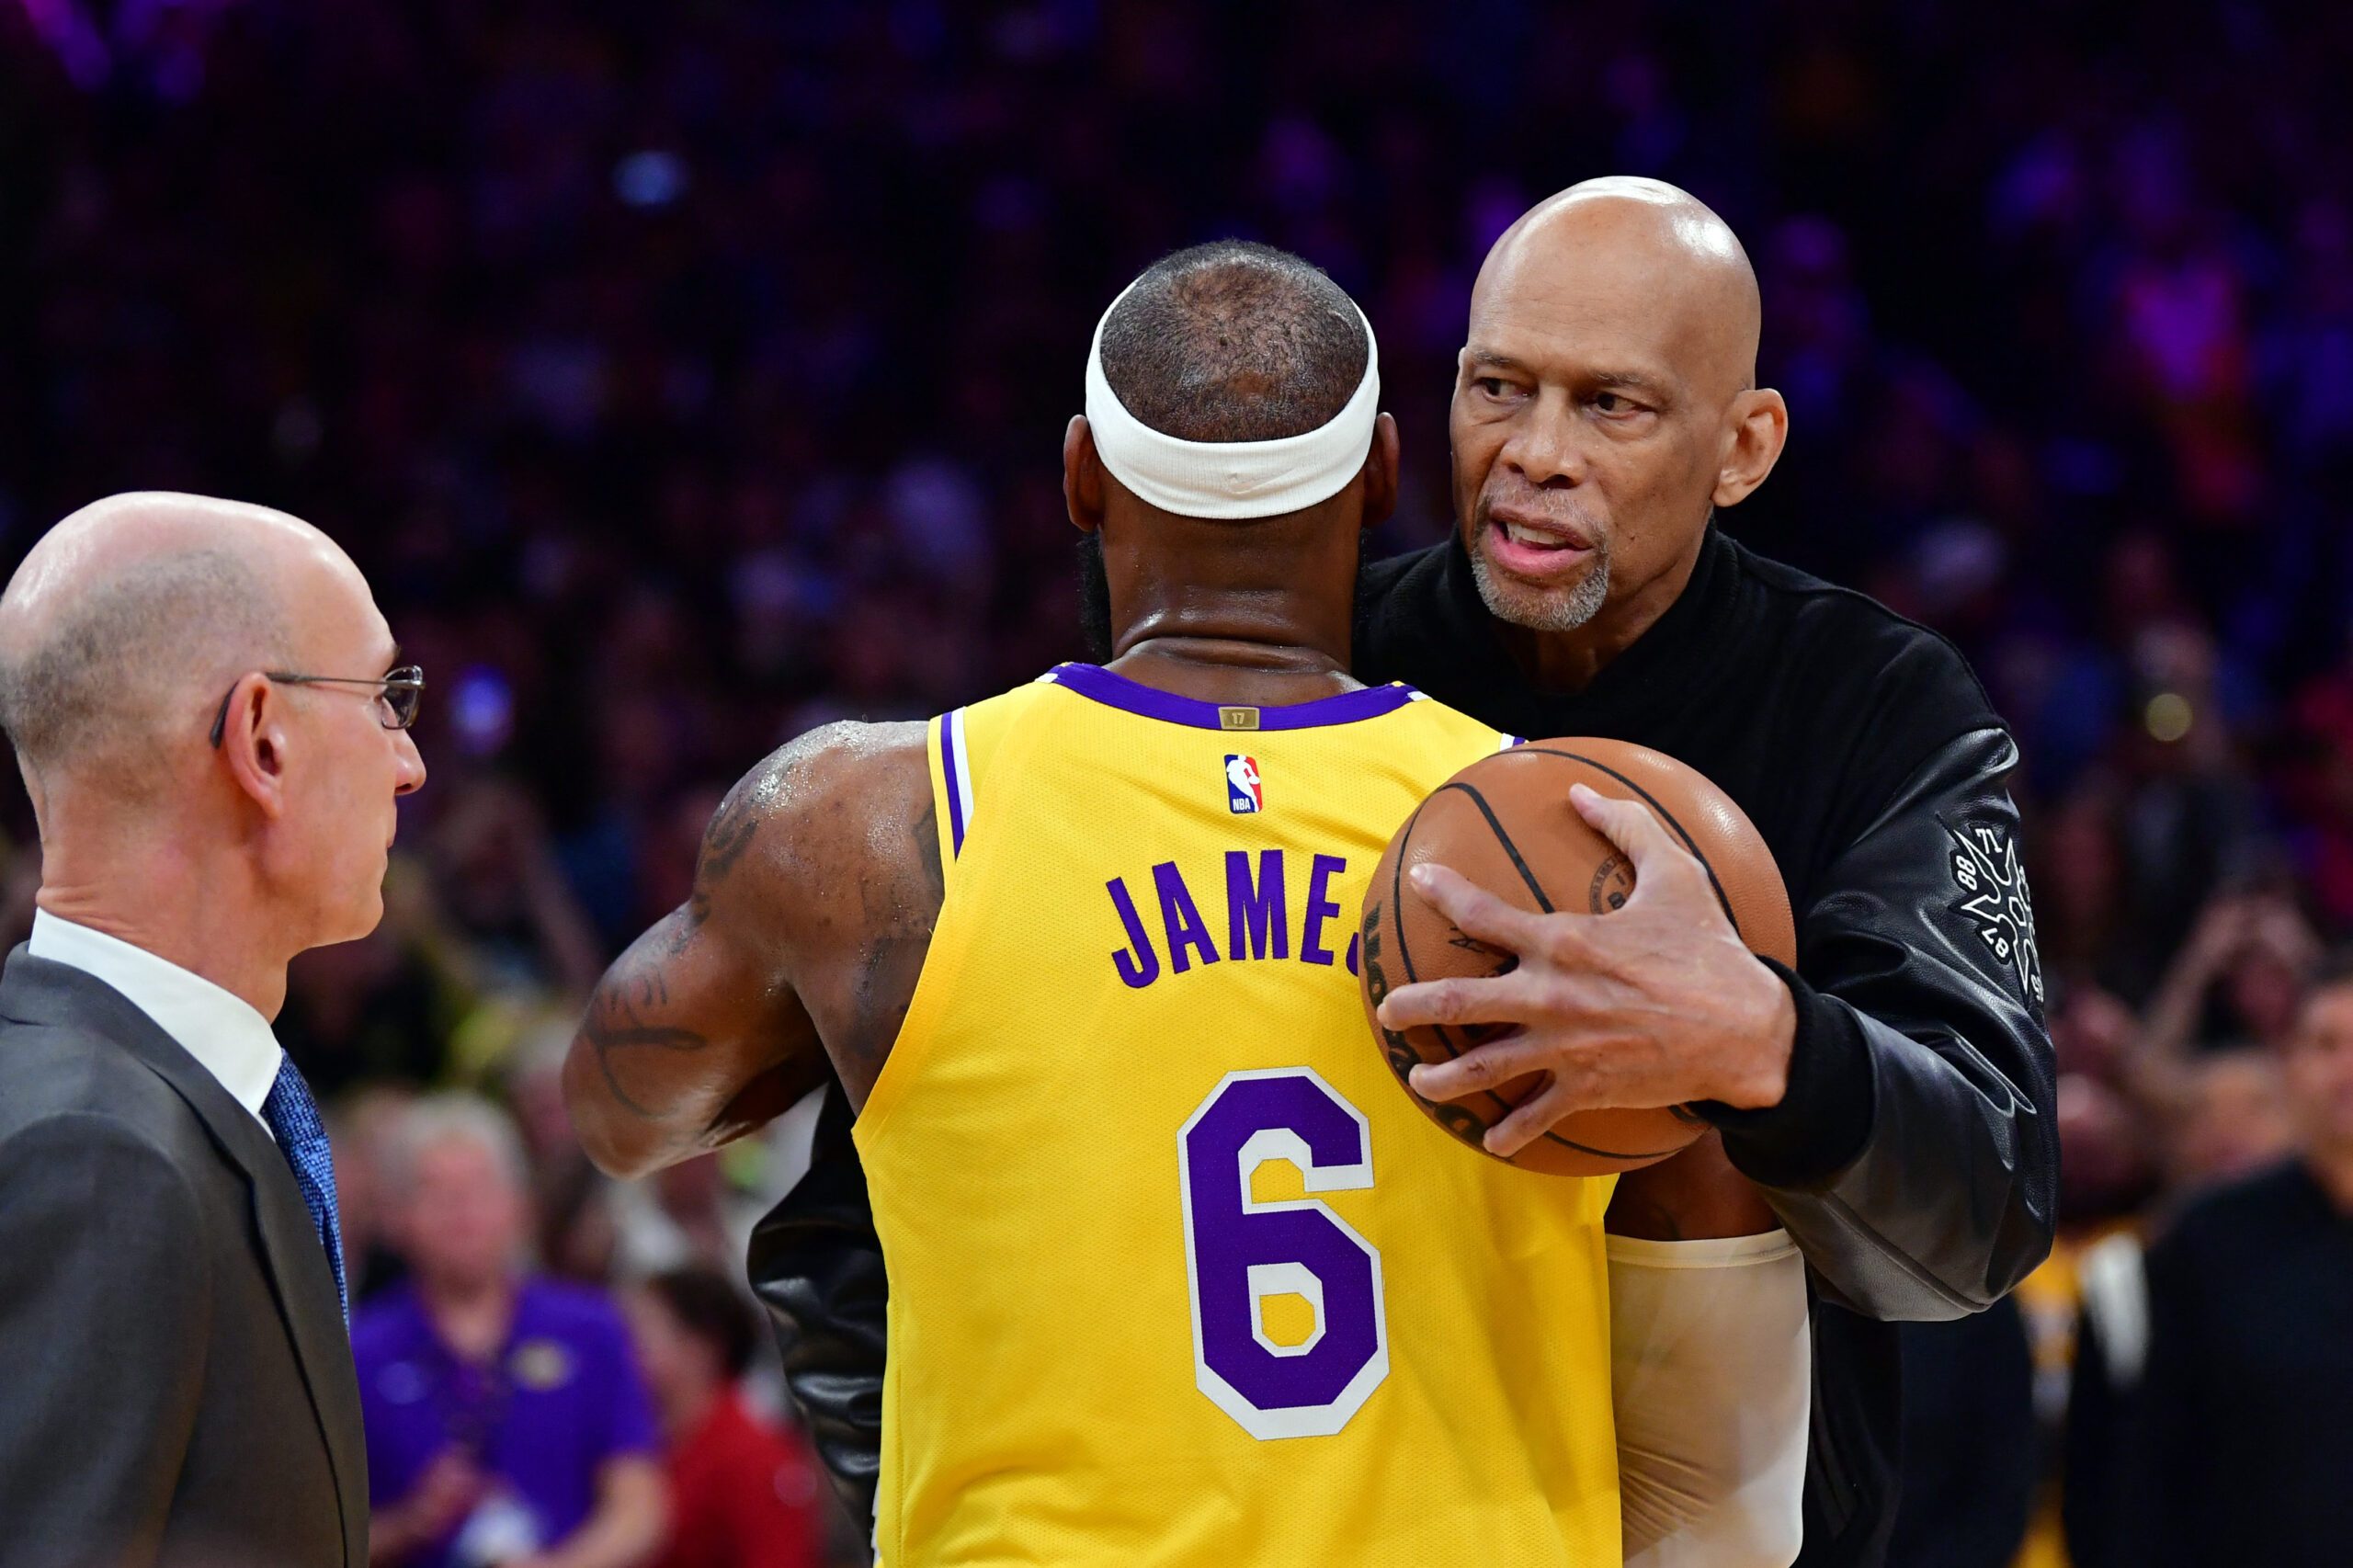 Abdul-Jabbar blames himself for lack of relationship with LeBron